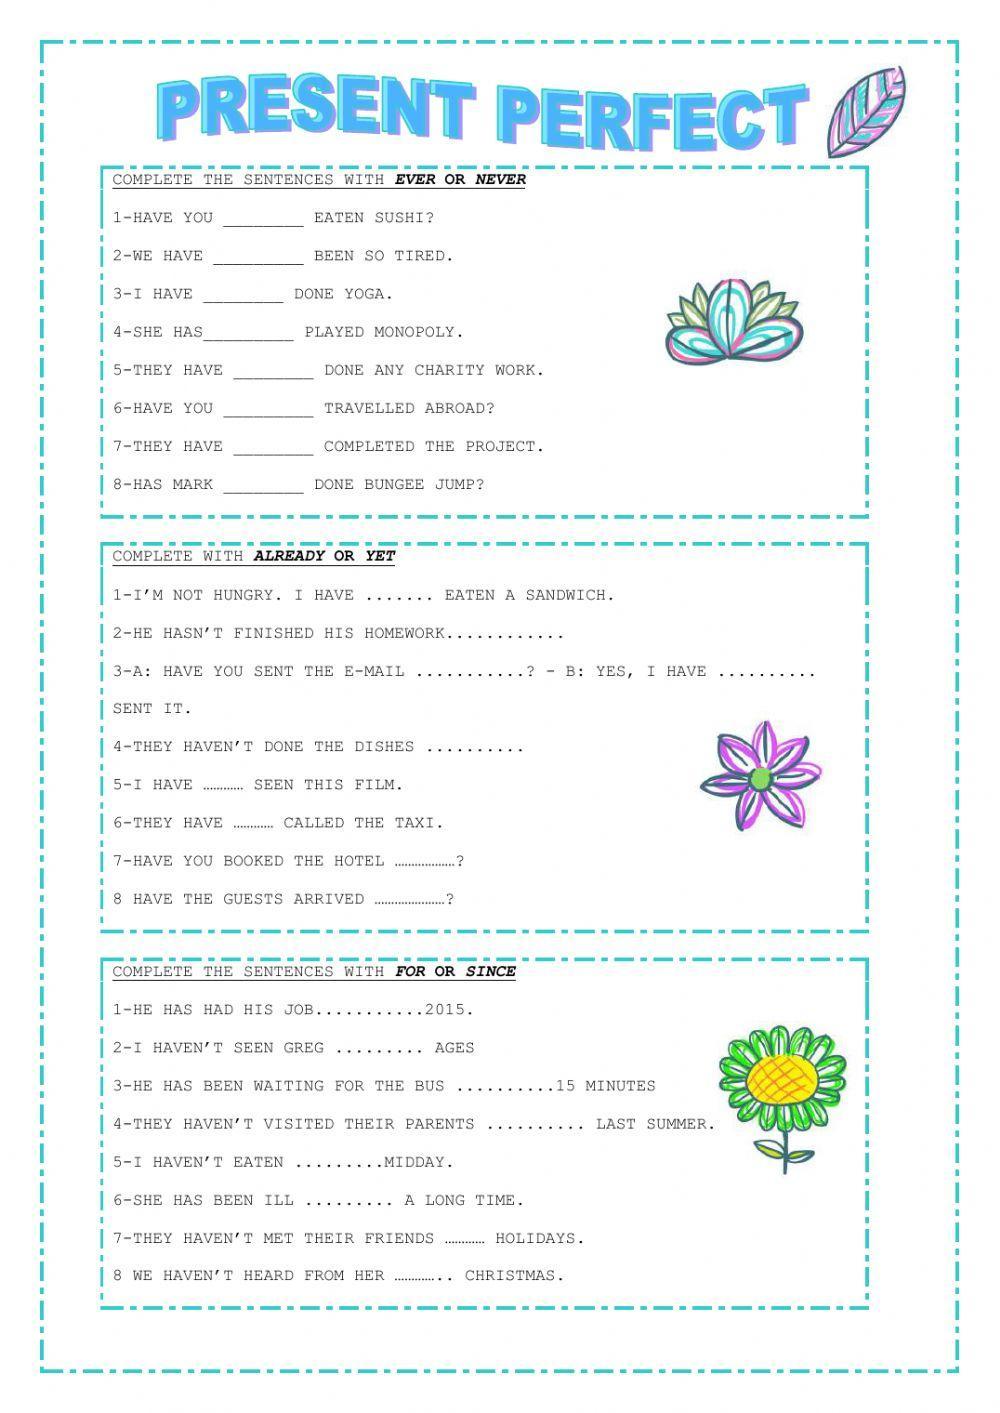 Time expressions with Present Perfect